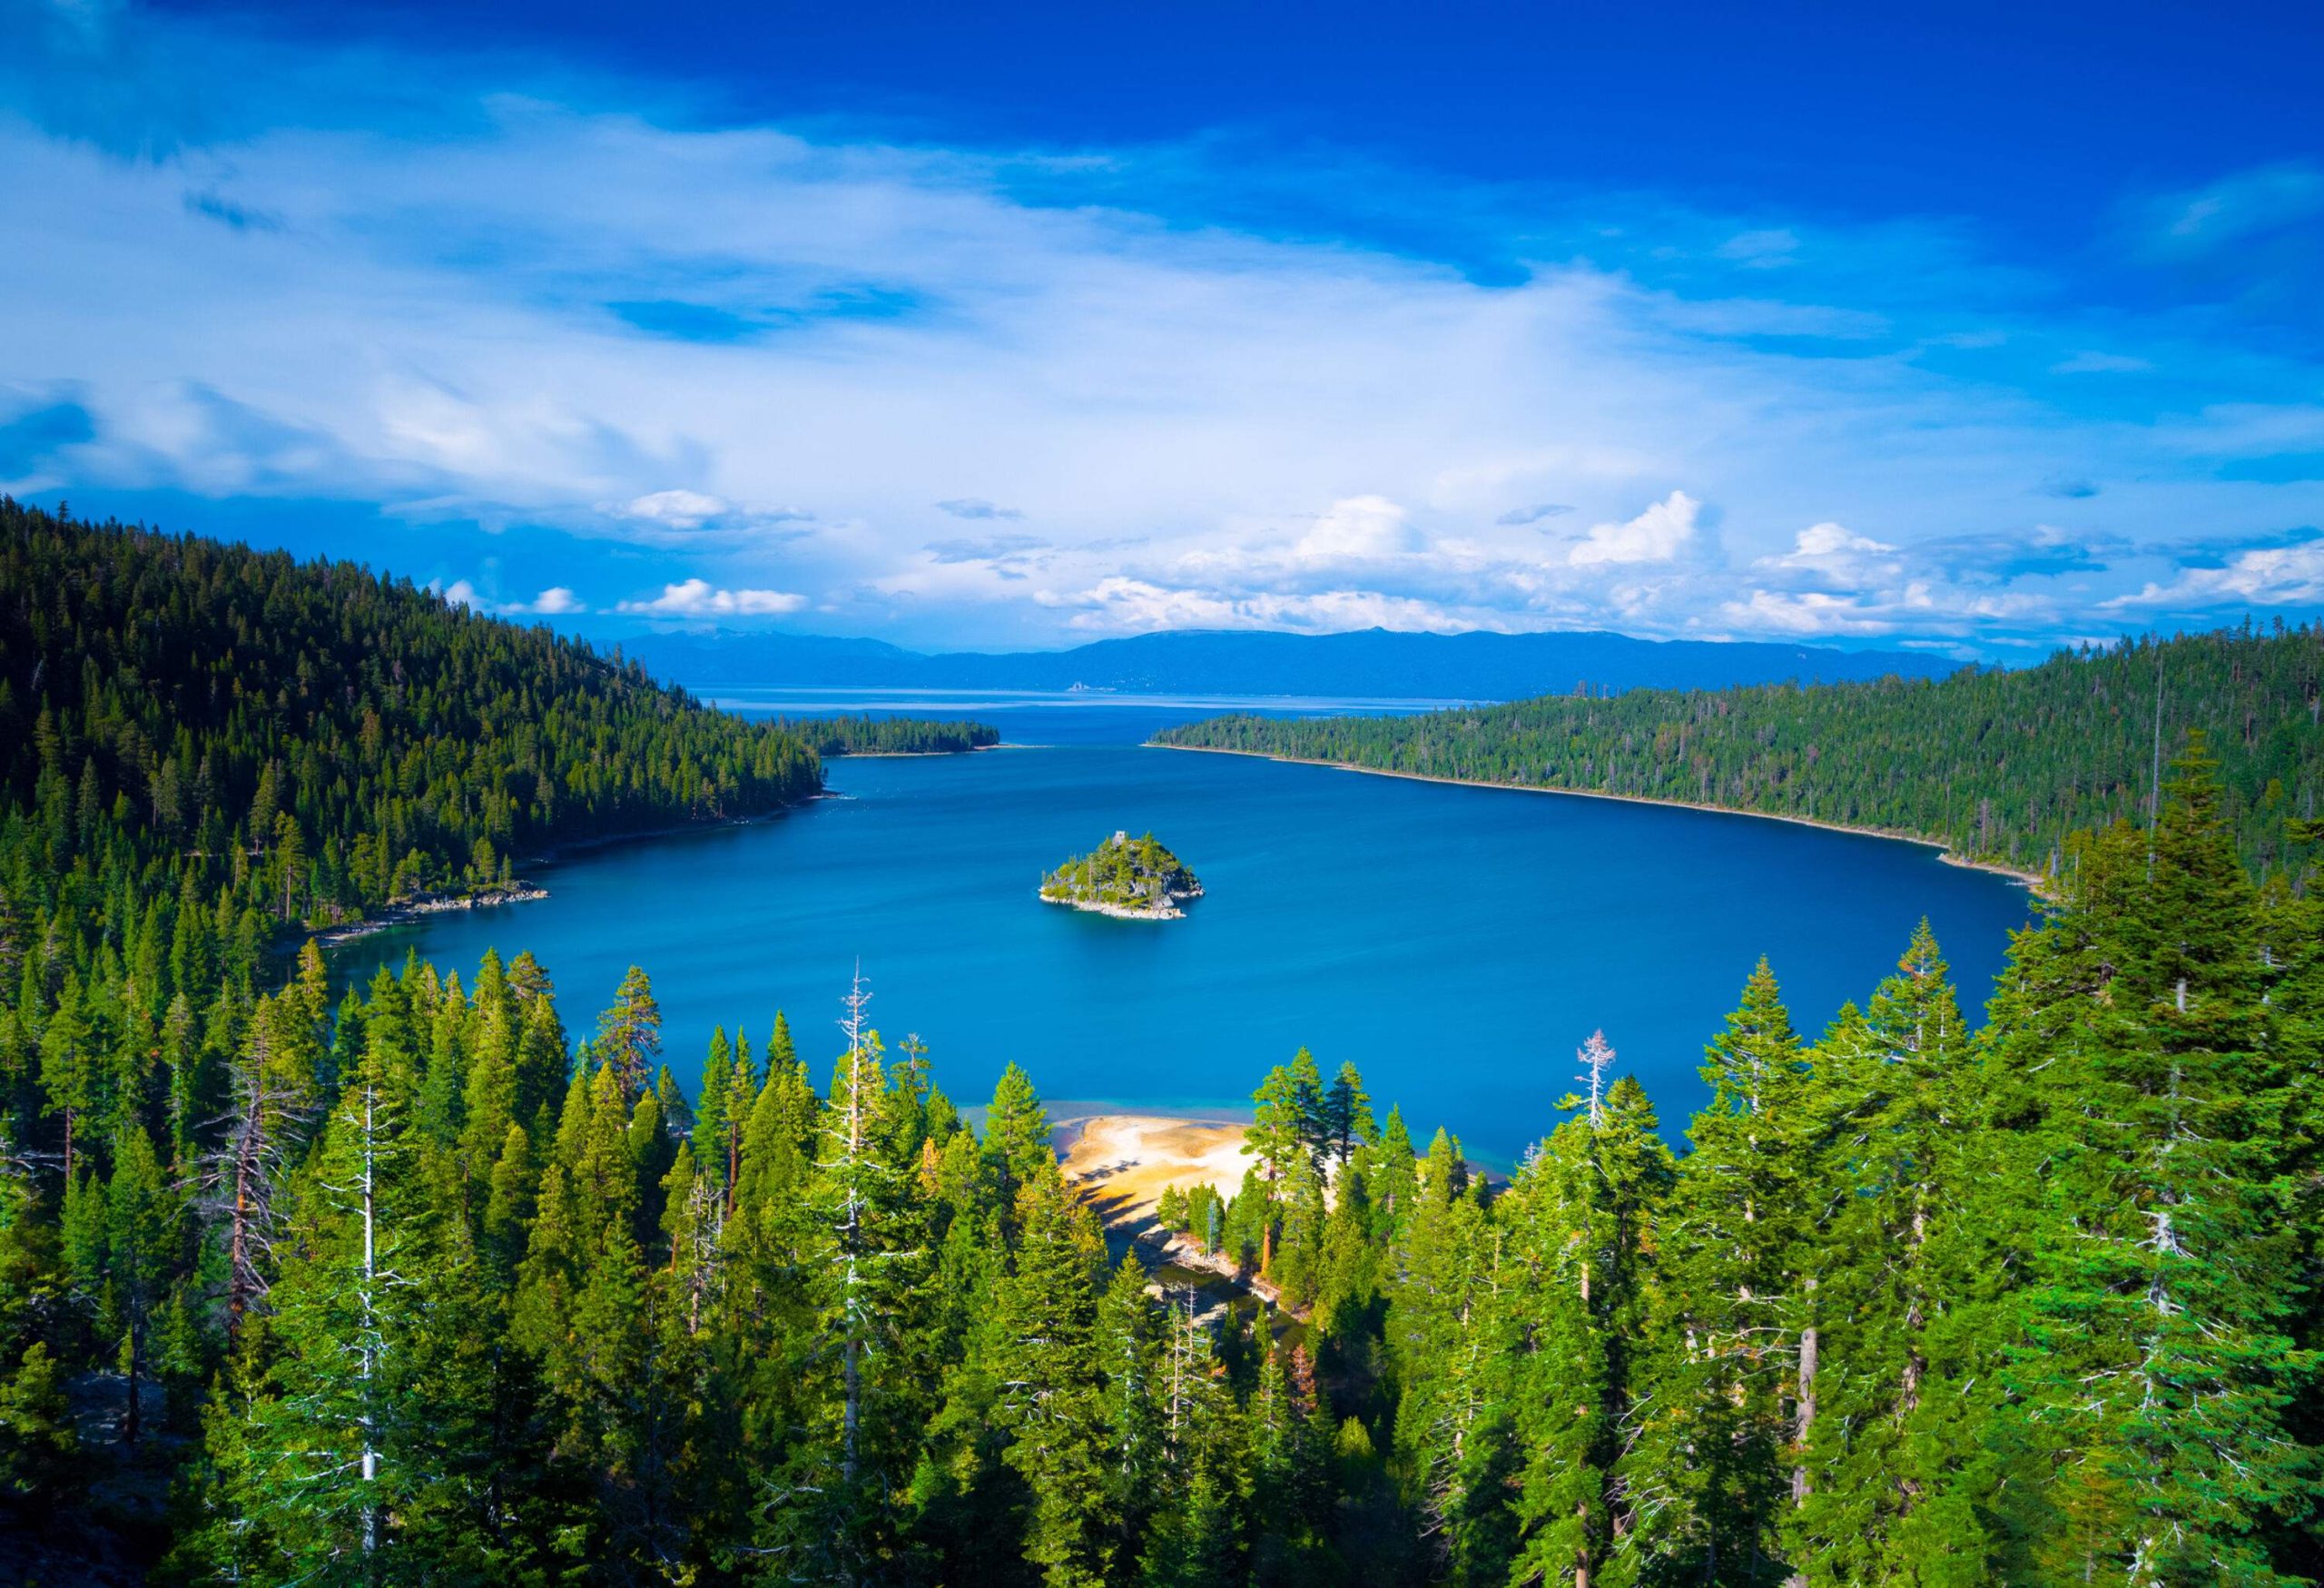 A pine forest surrounds an island in the middle of a blue lake.